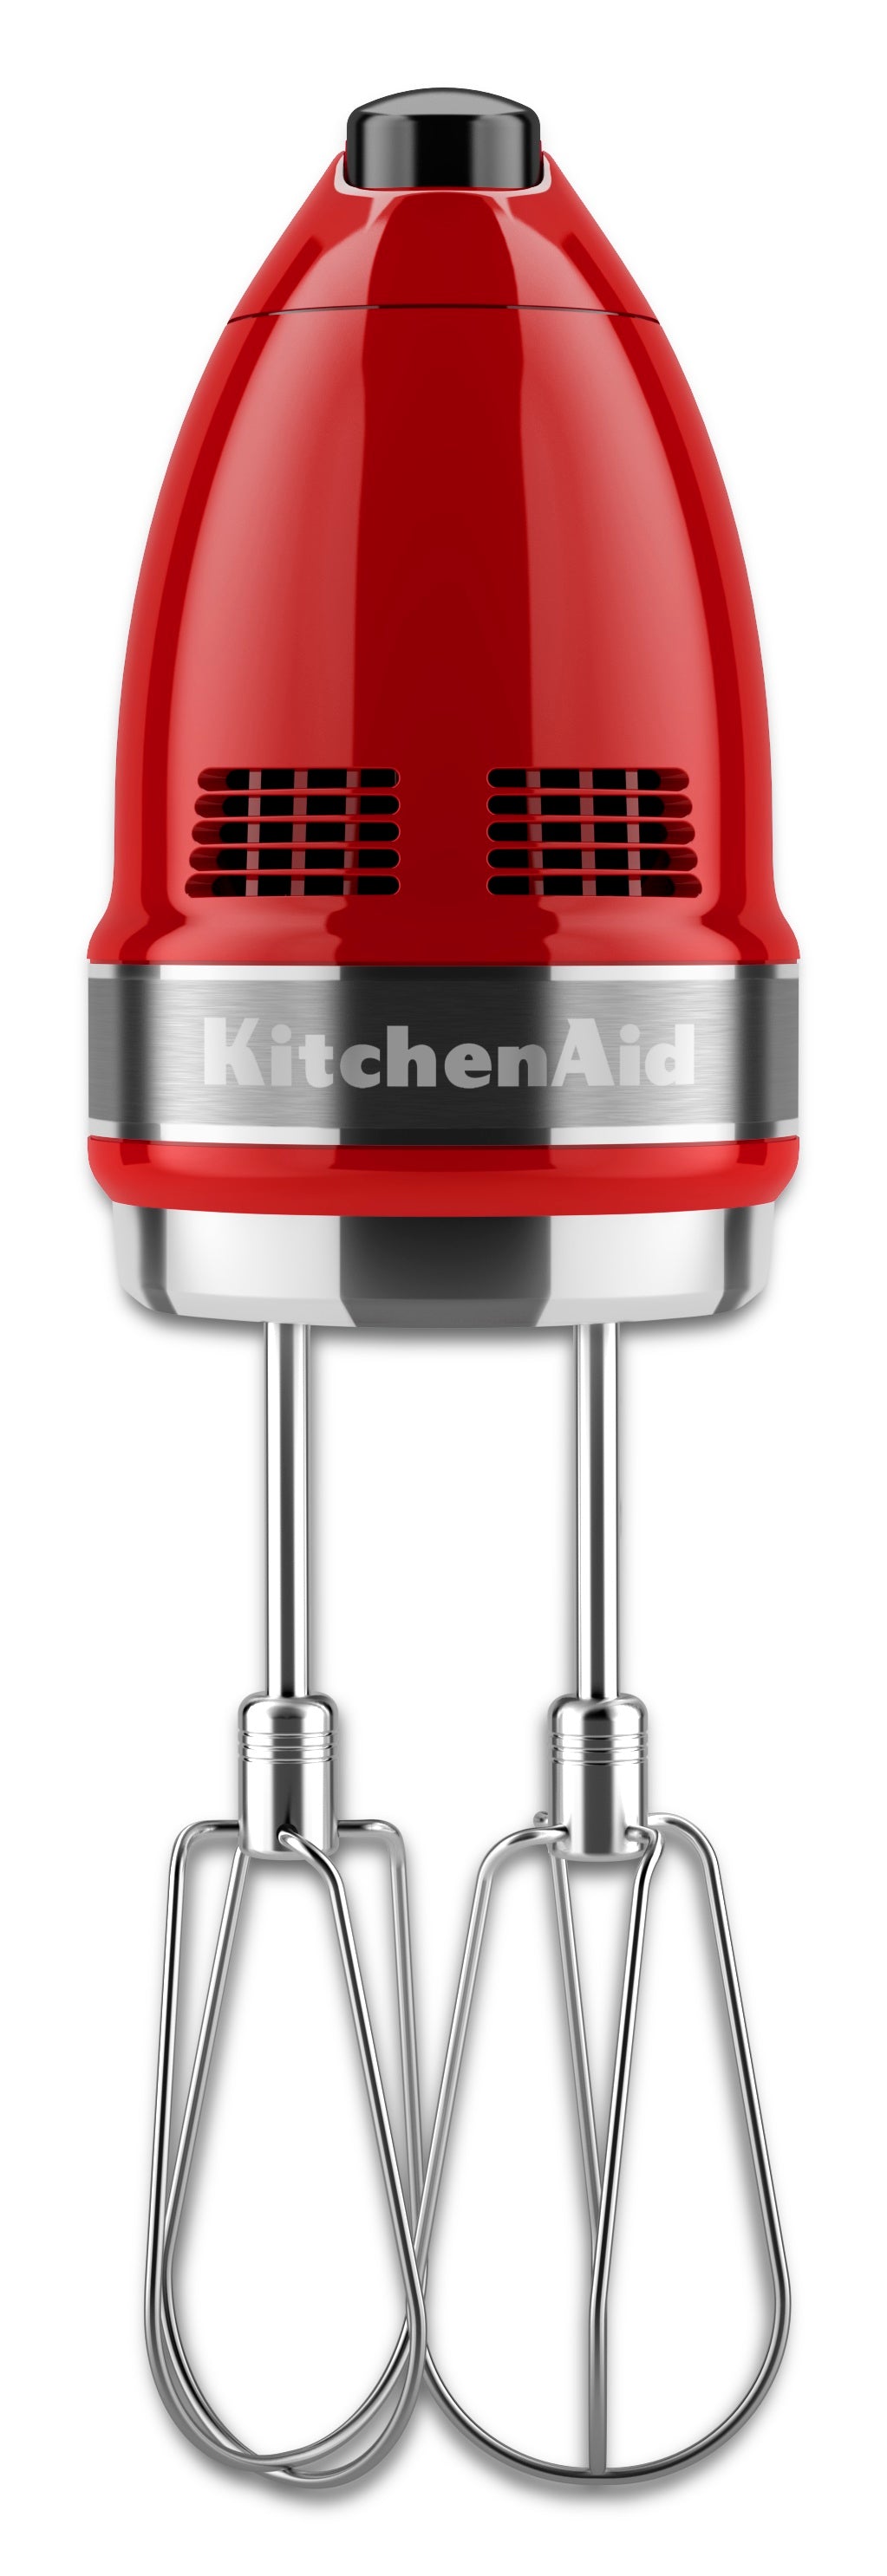 buy food preparation appliances at cheap rate in bulk. wholesale & retail small home appliances repair kits store.